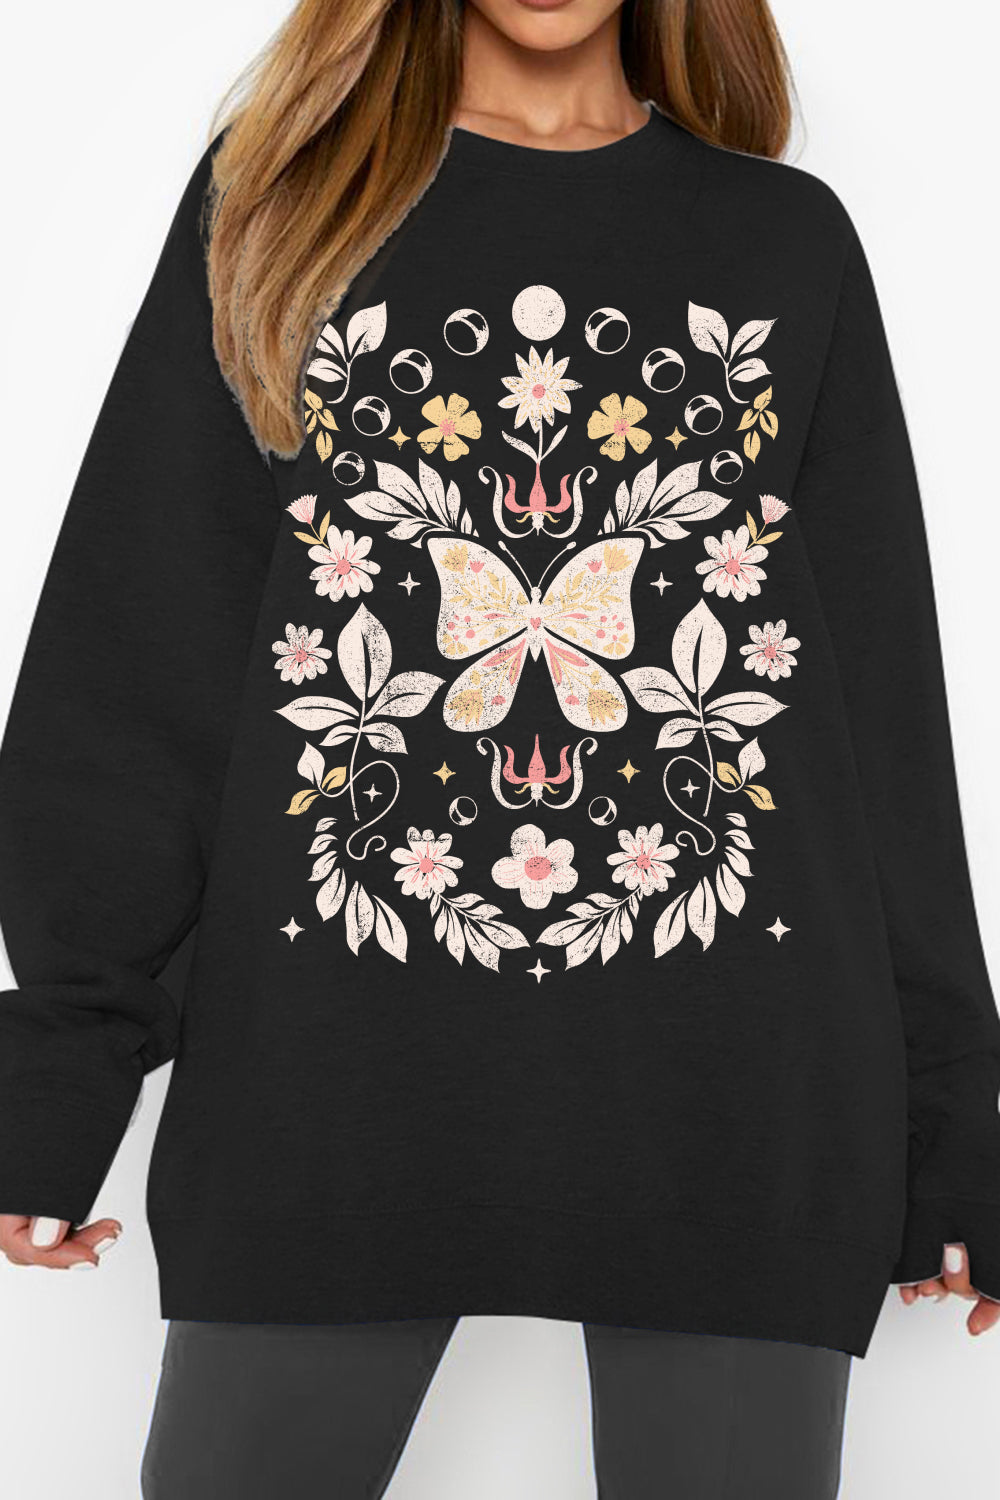 Full Size Flower and Butterfly Graphic Sweatshirt - T-Shirts - Shirts & Tops - 9 - 2024